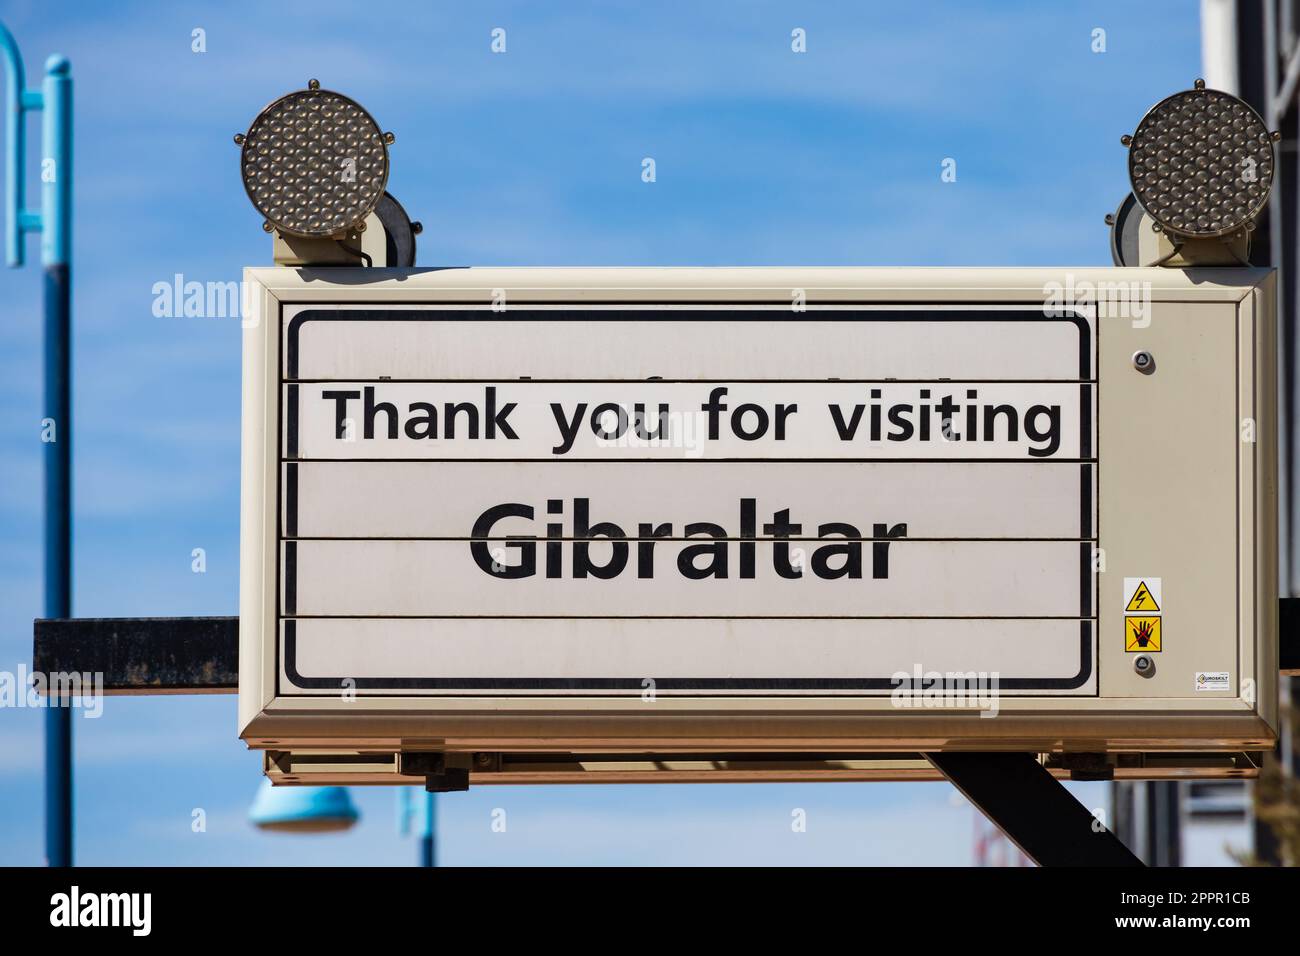 Thank you for visiting Gibraltar sign. North Mole Road. The British Overseas Territory of Gibraltar, the Rock of Gibraltar on the Iberian Peninsula. Stock Photo